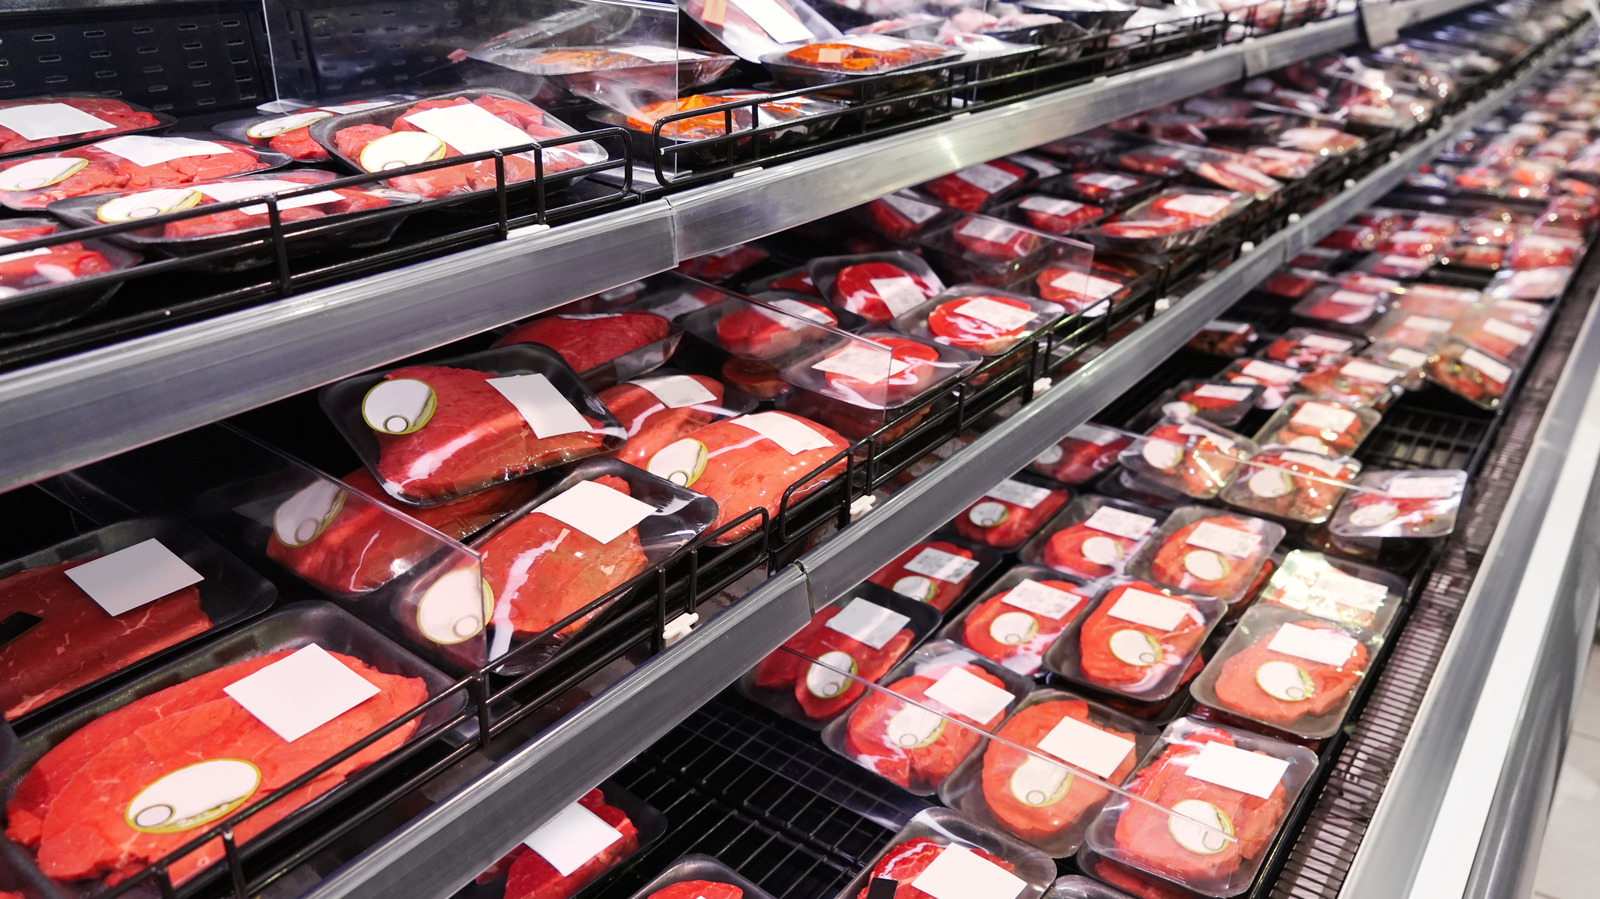 The 11 Grocery Stores With the Best Meat Departments, Ranked - Perishable  News